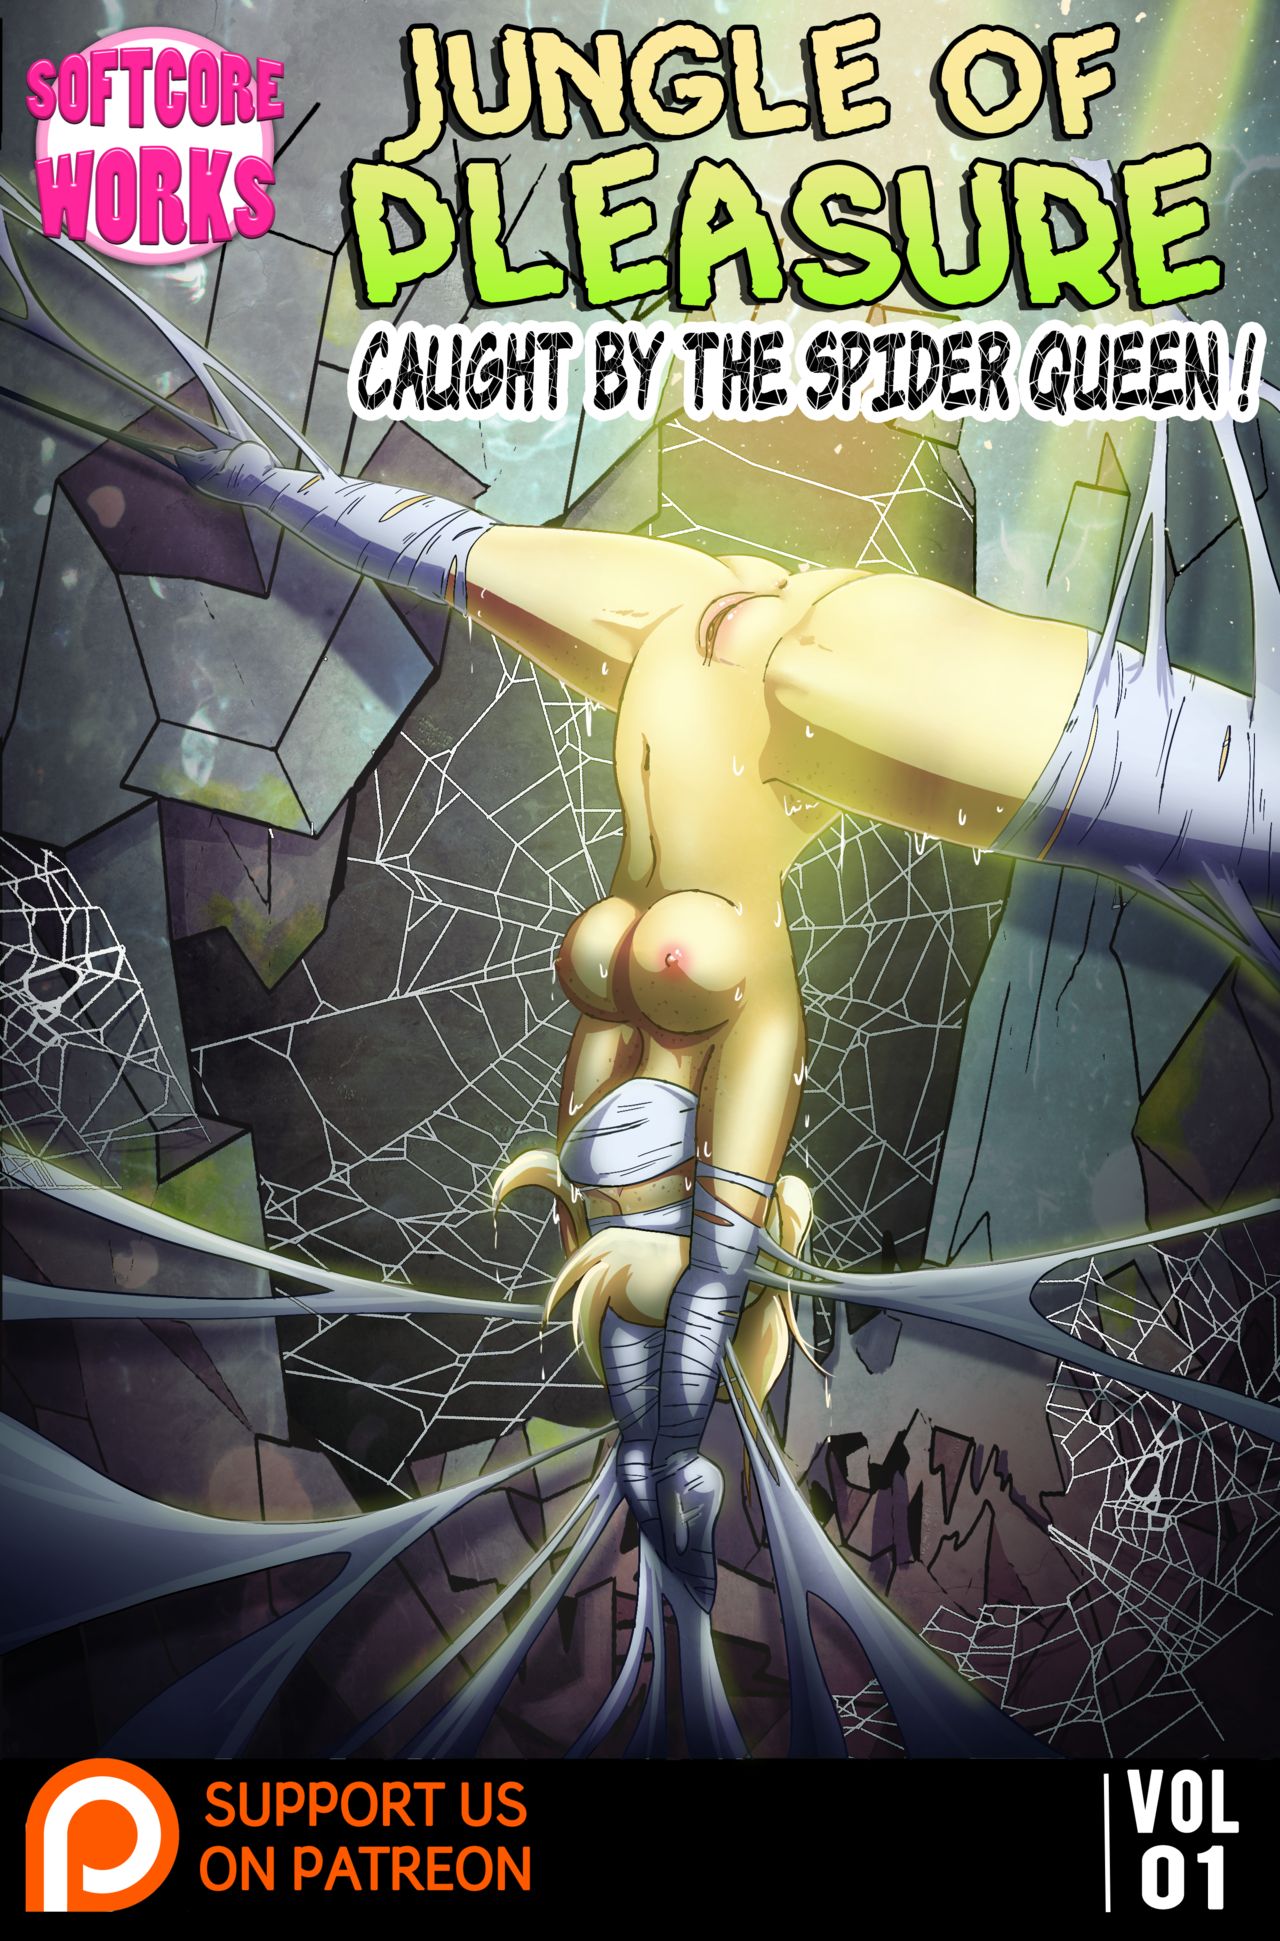 Softcore Works Jungle of Pleasure Volume 1 Caught by the Spider Queen